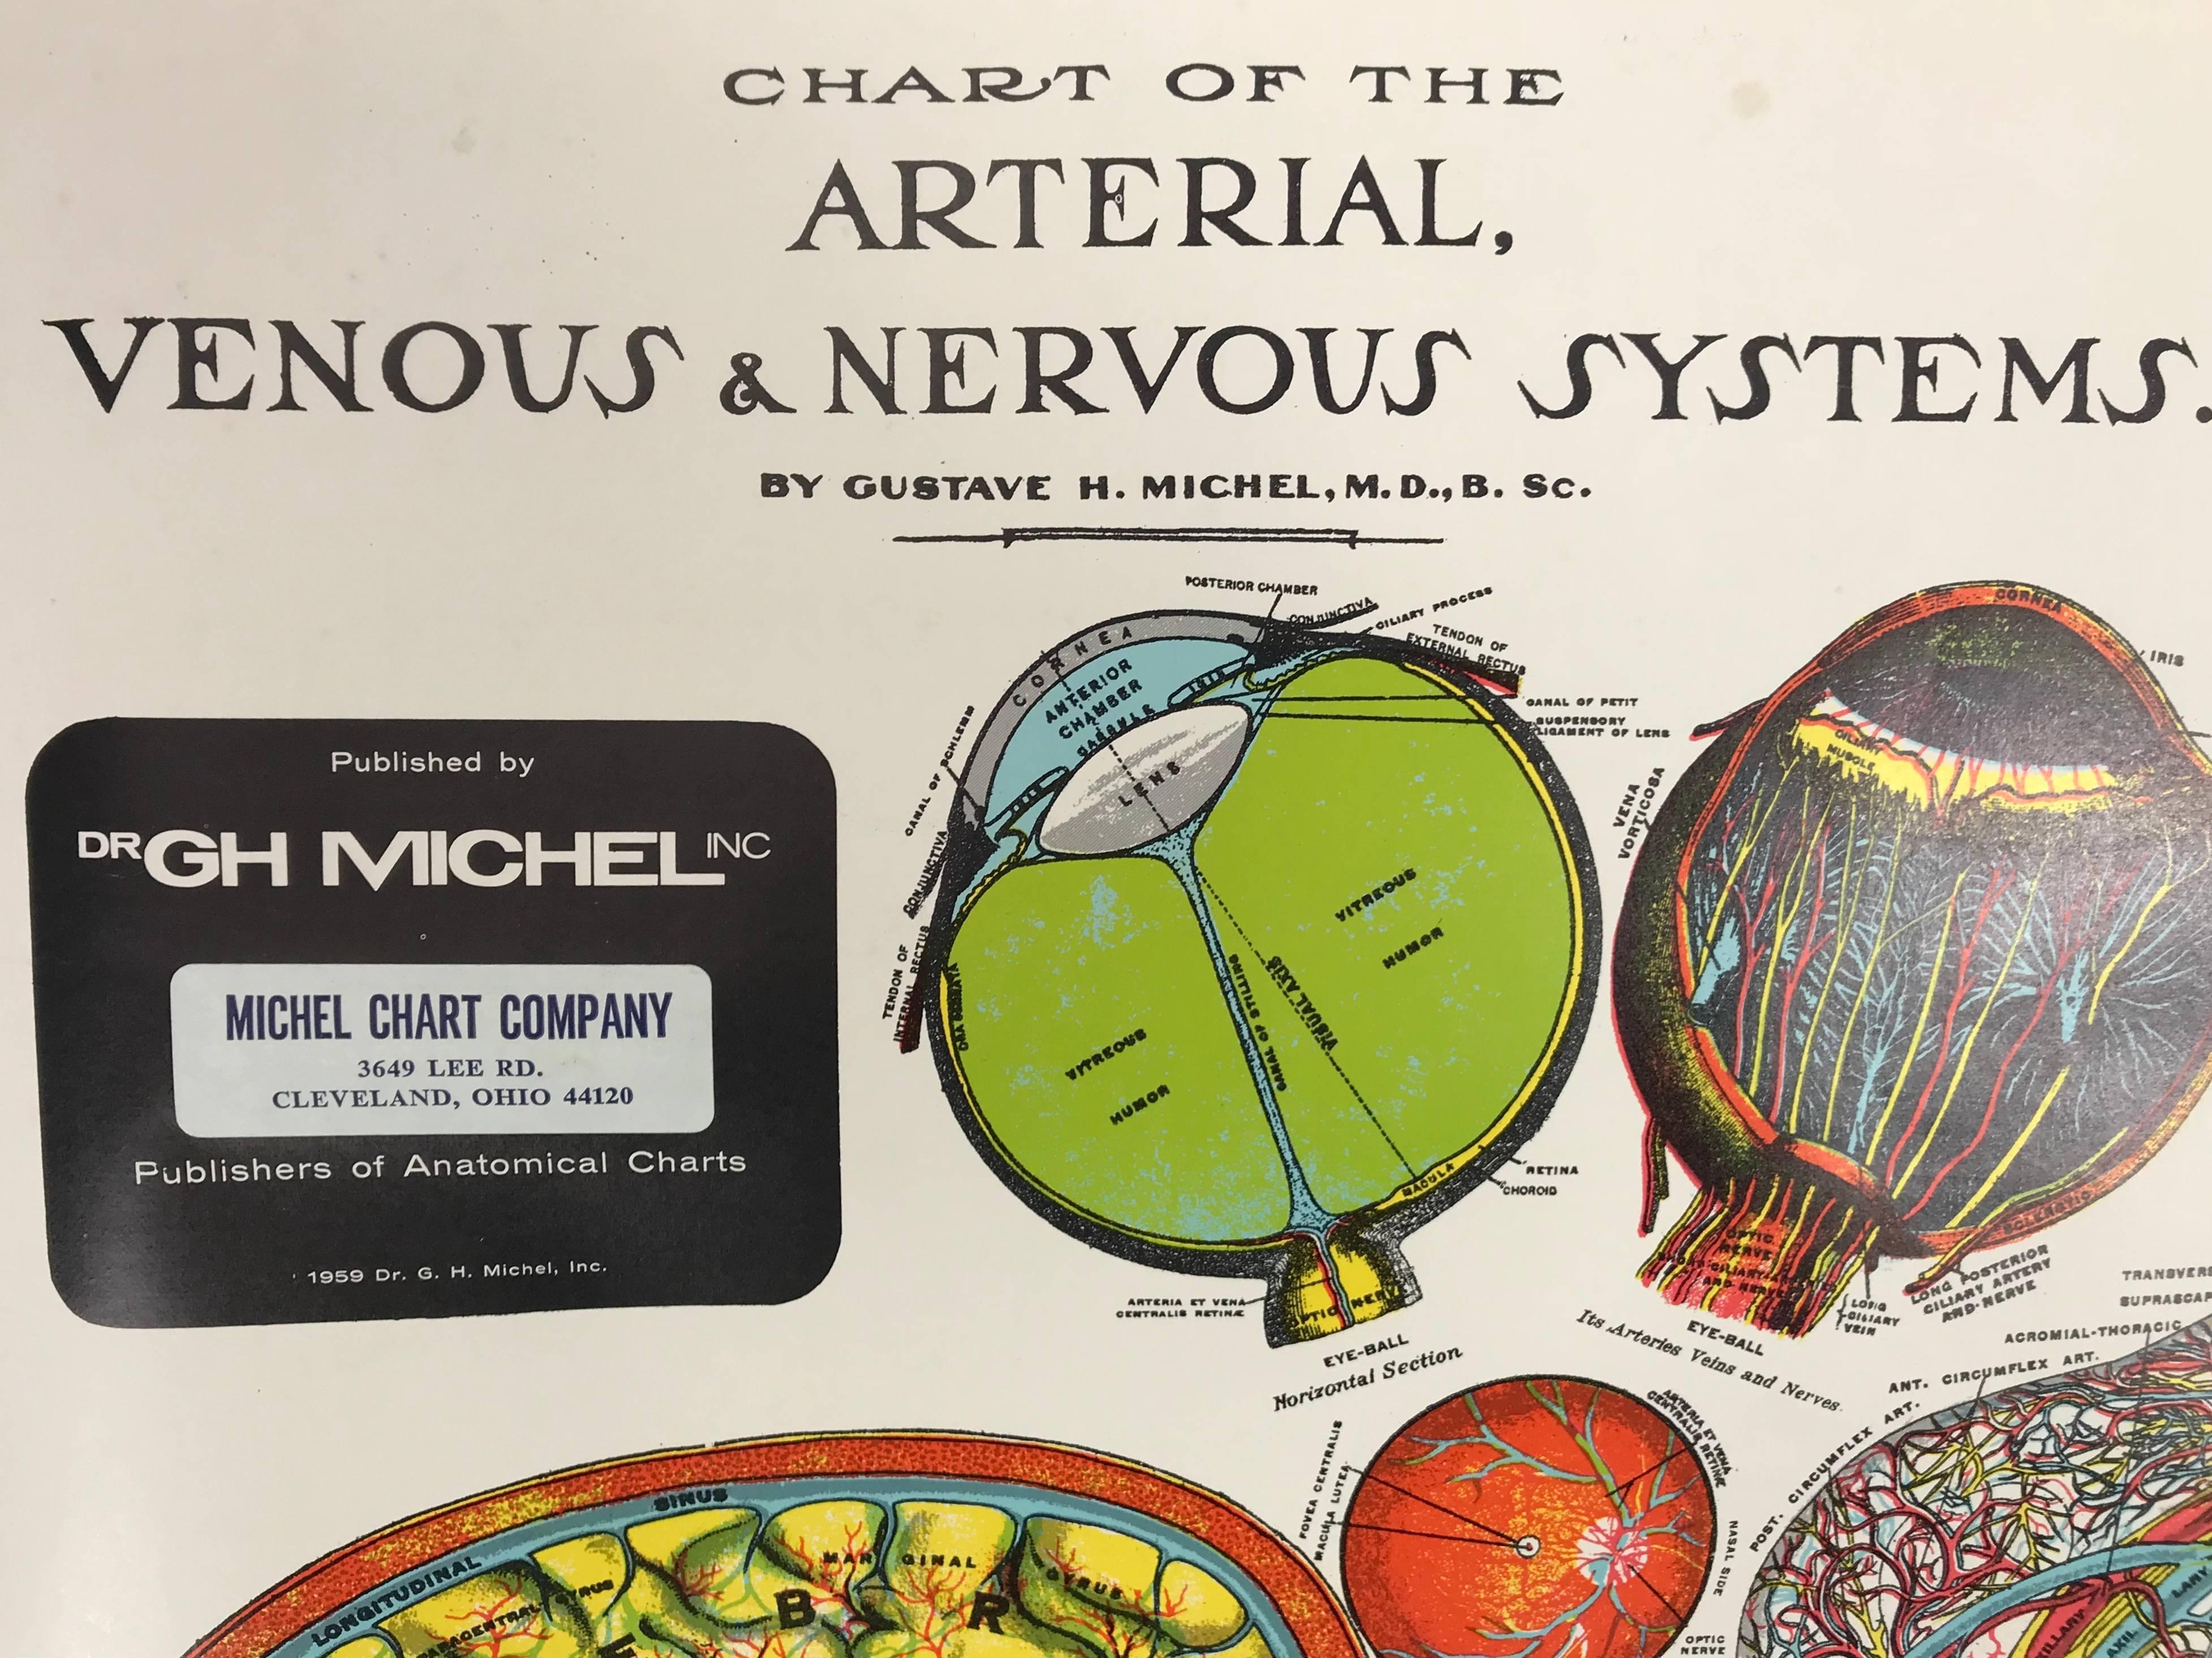 Vintage Anatomical Pull Down Chart 'ARTERIAL VENOUS & NERVOUS SYSTEMS ,GH Michel Company,Beautifully screened printed,linen backed.